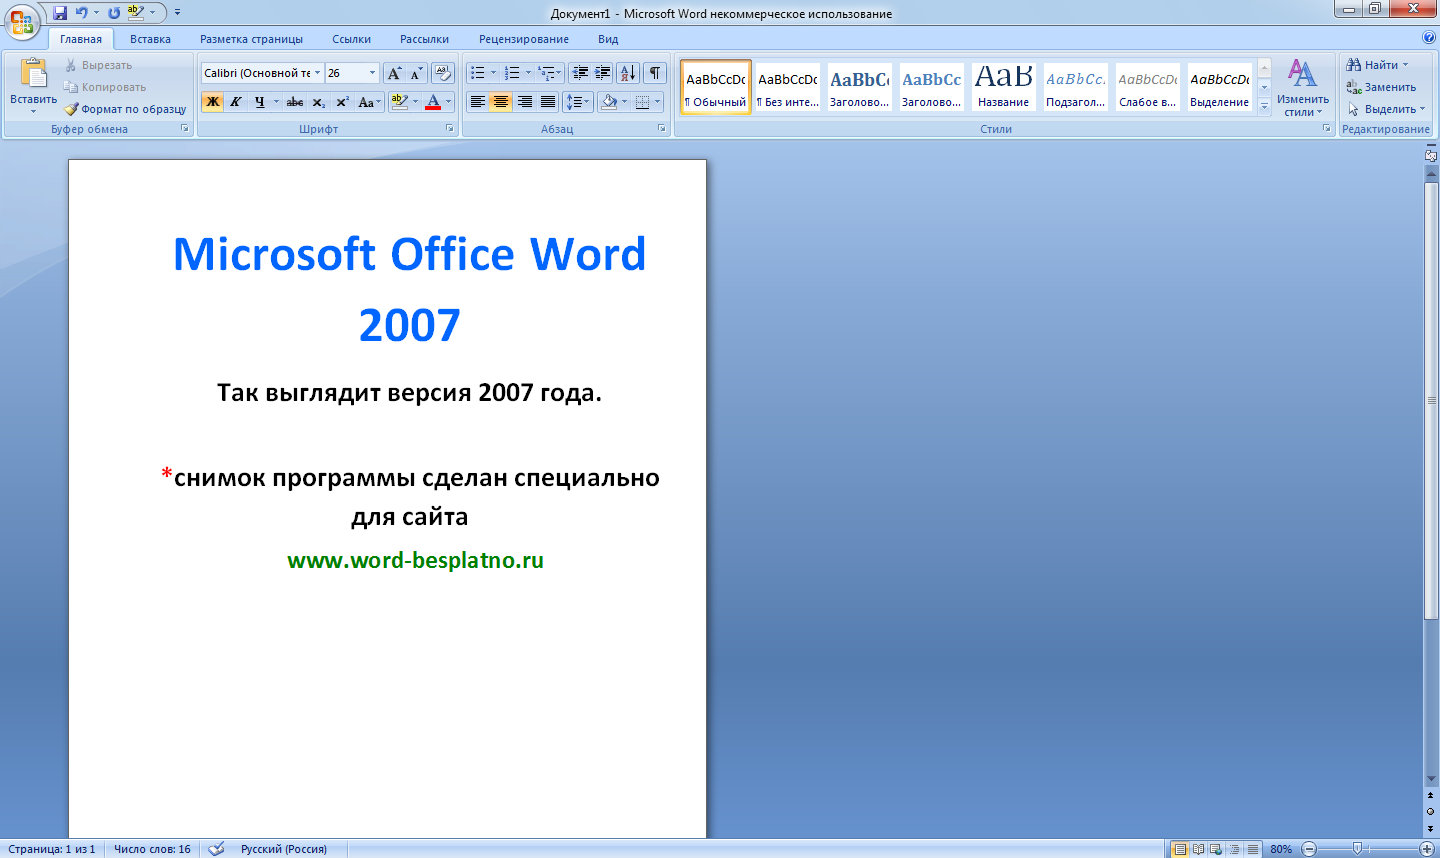 Office word can. Microsoft Office ворд. Microsoft Office 2007 ворд. Программа Word Office. Офисная программа Word.